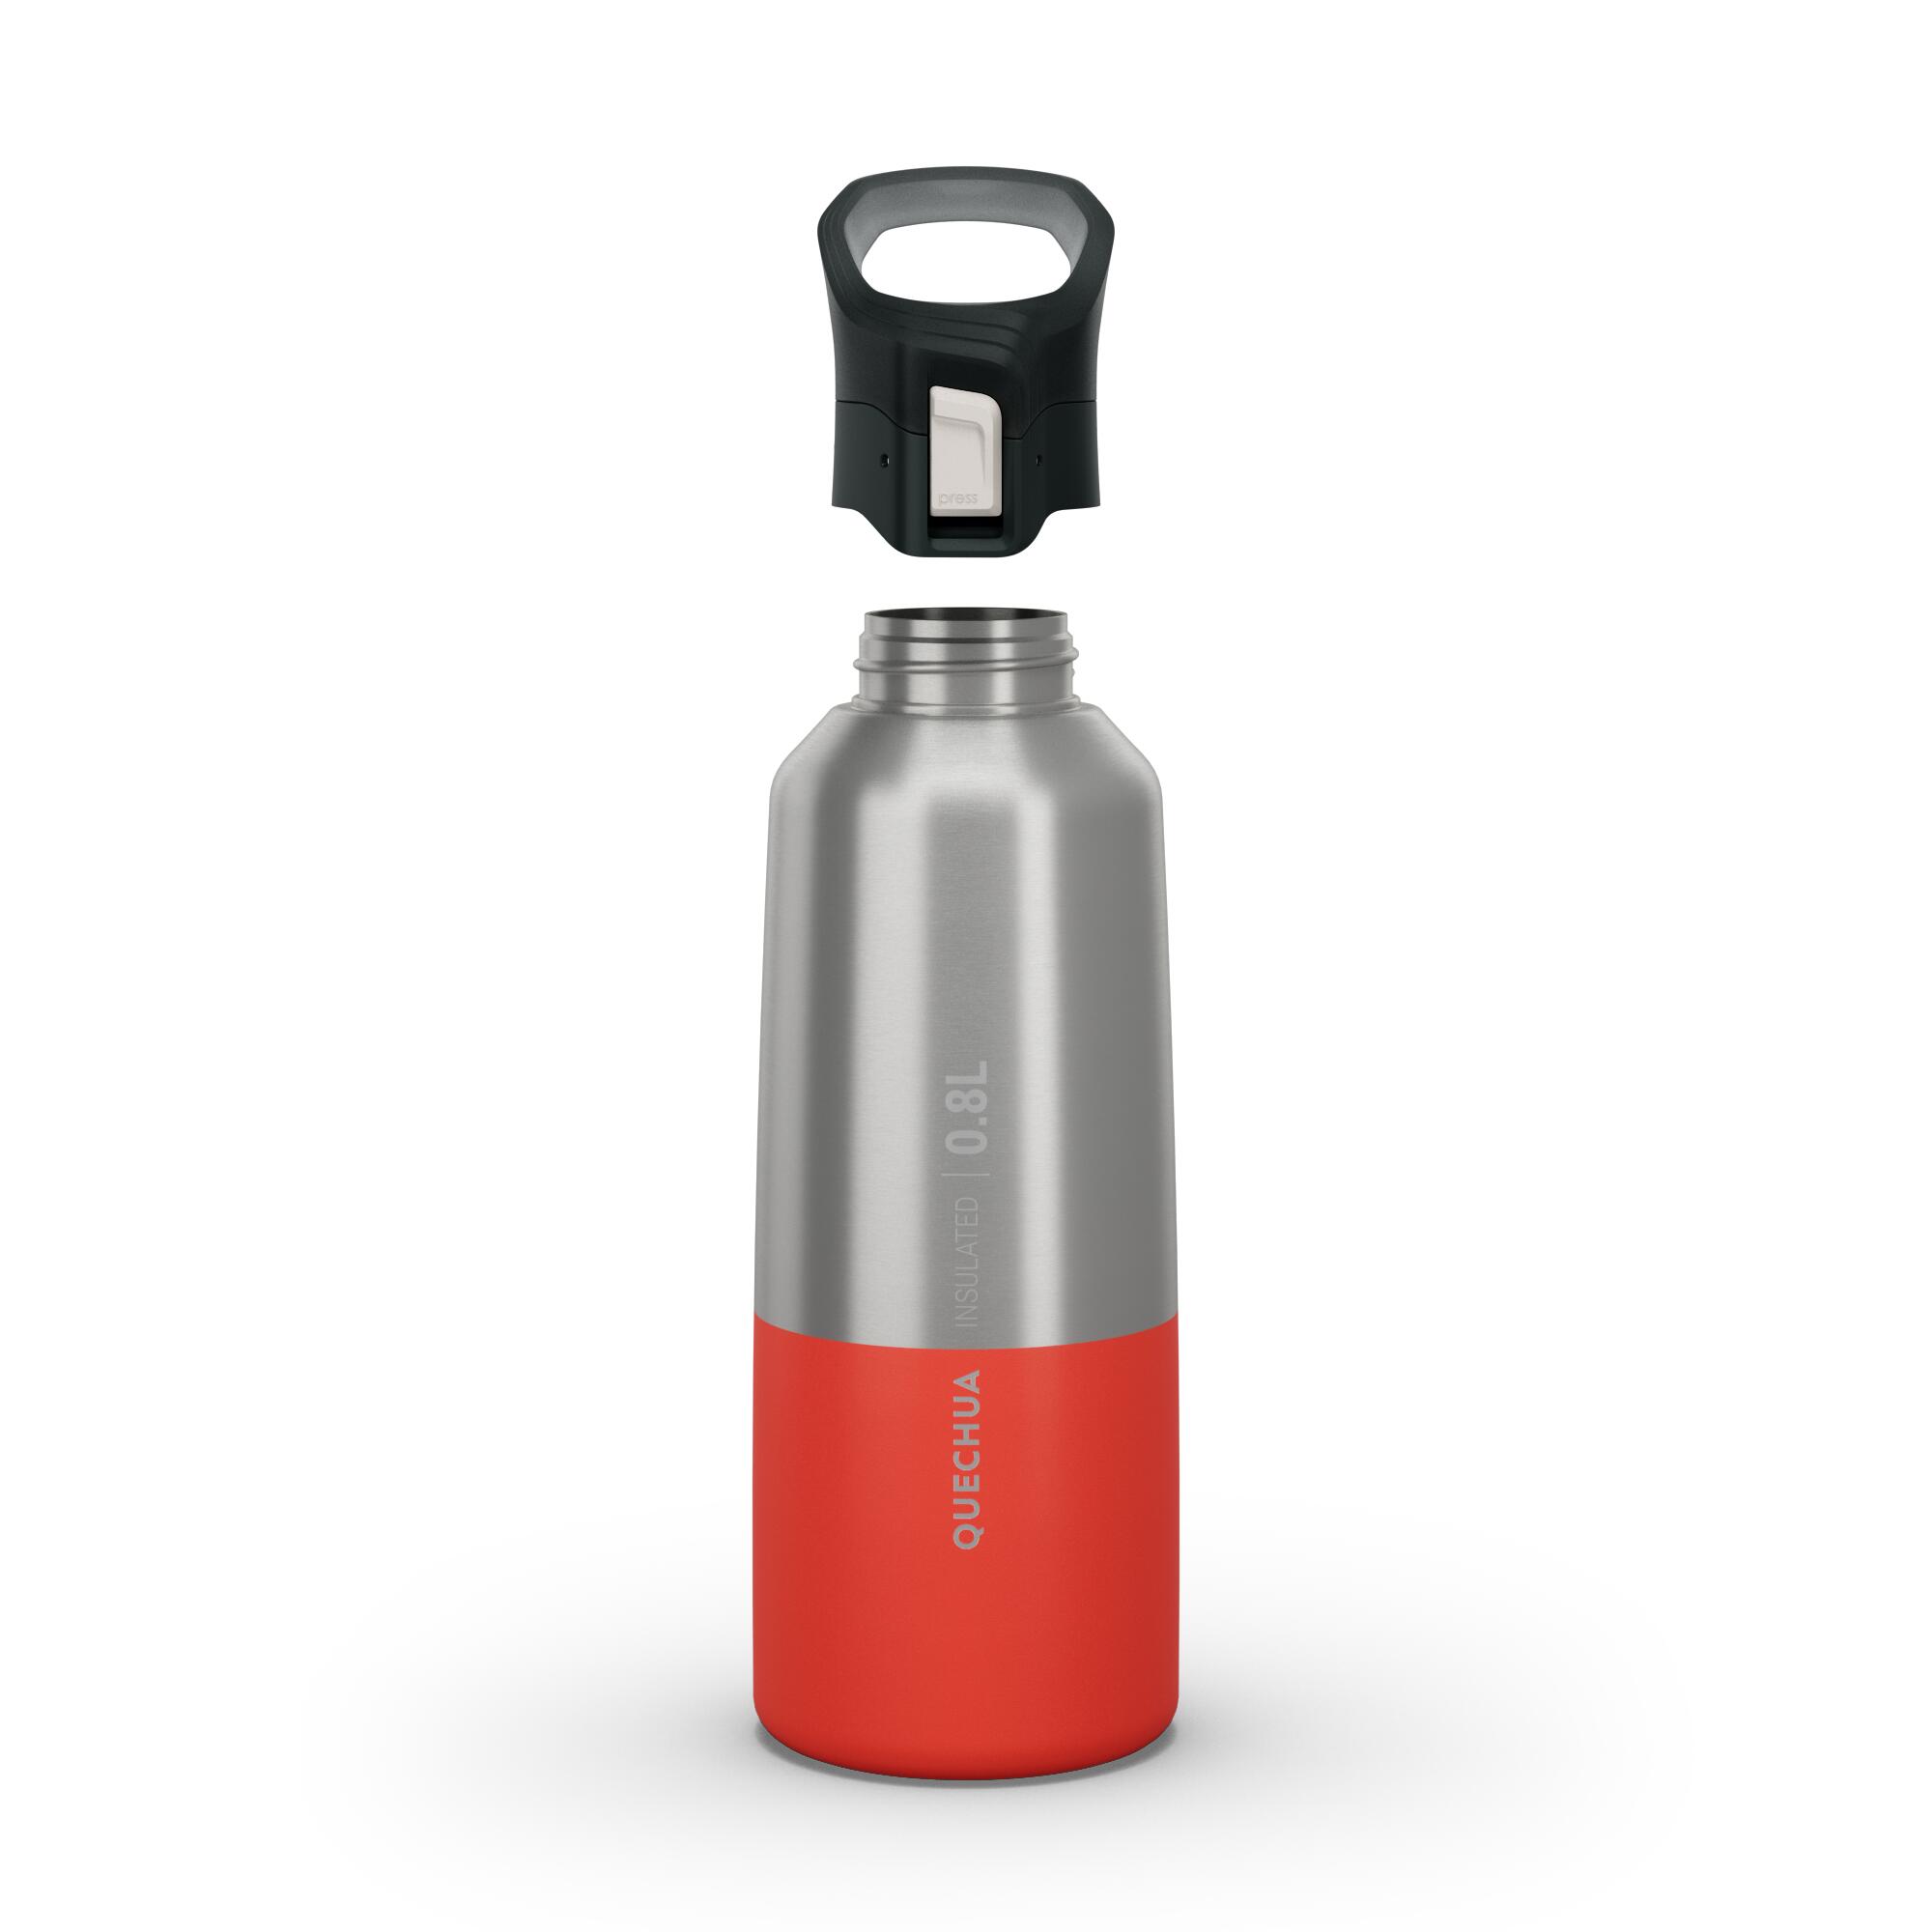 0.8 L stainless steel water bottle with quick-open cap for hiking - Red 22/35